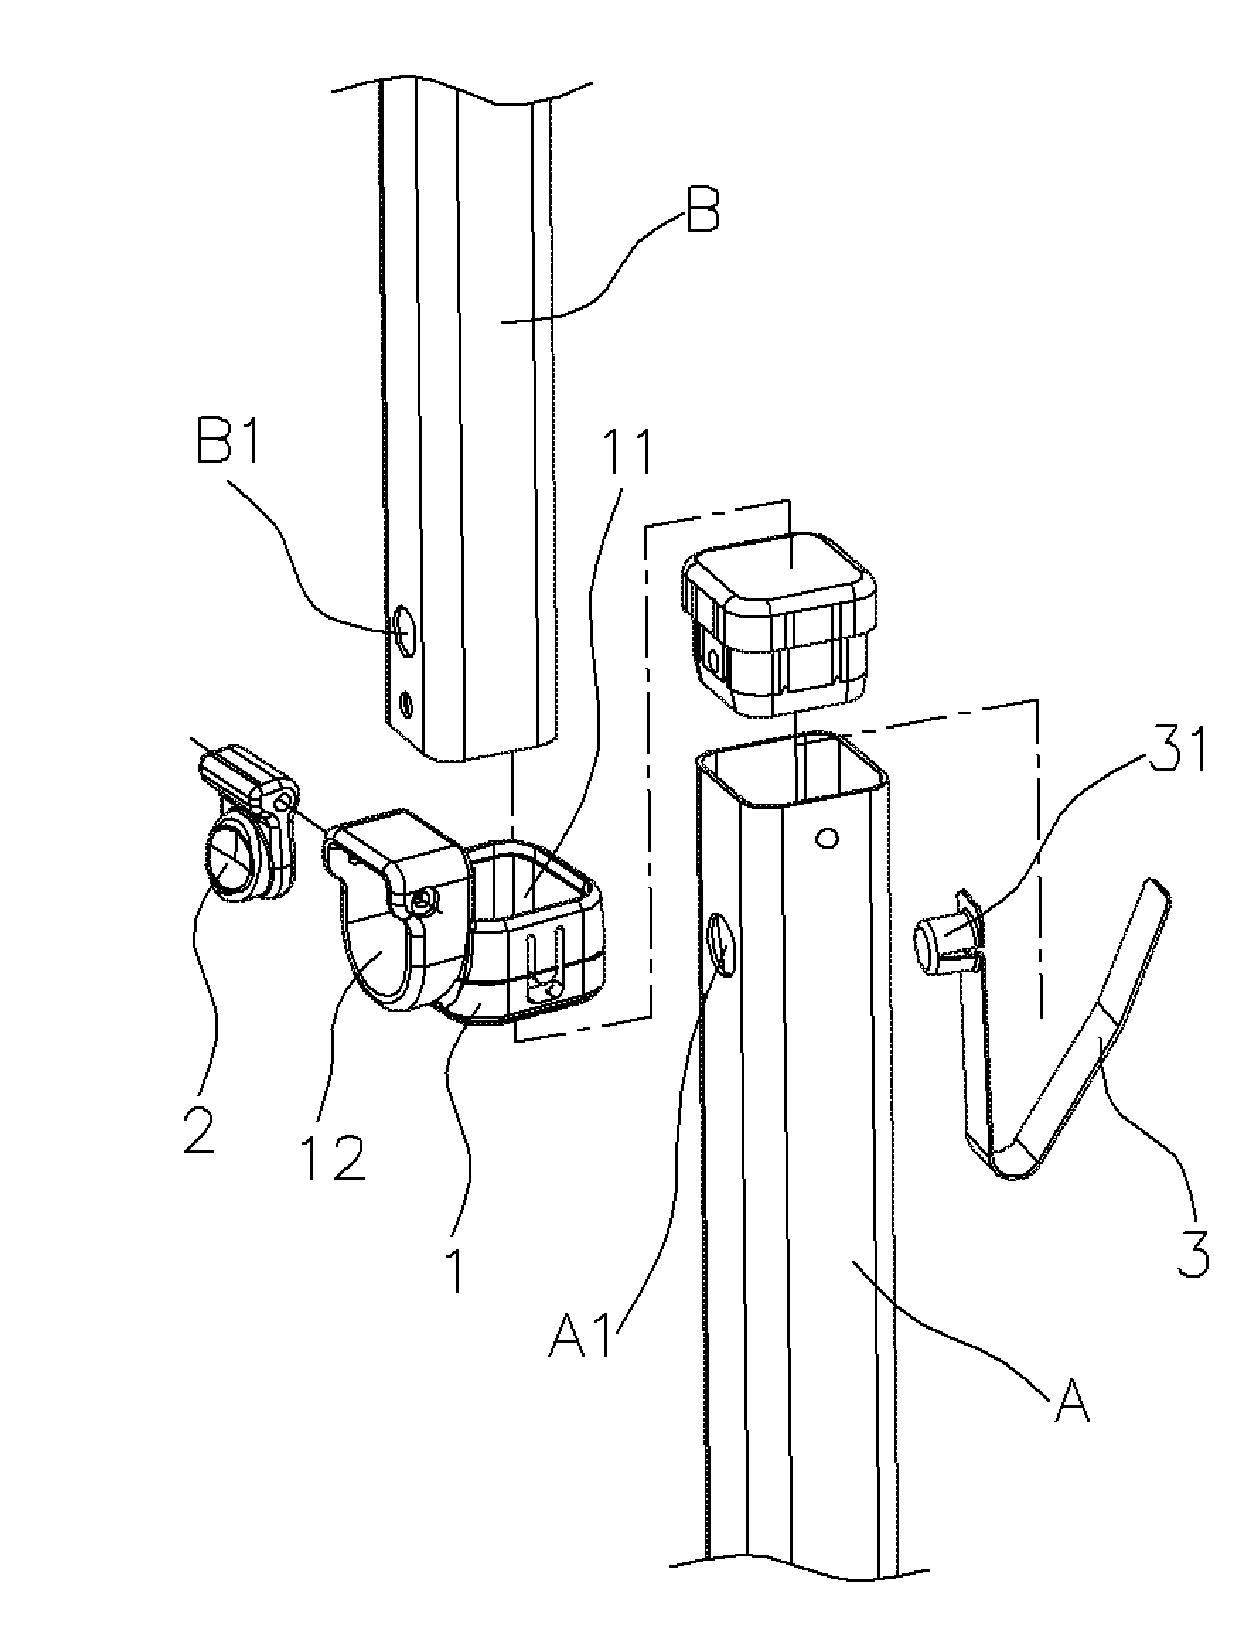 Snapping mechanism of telescoping tent pole